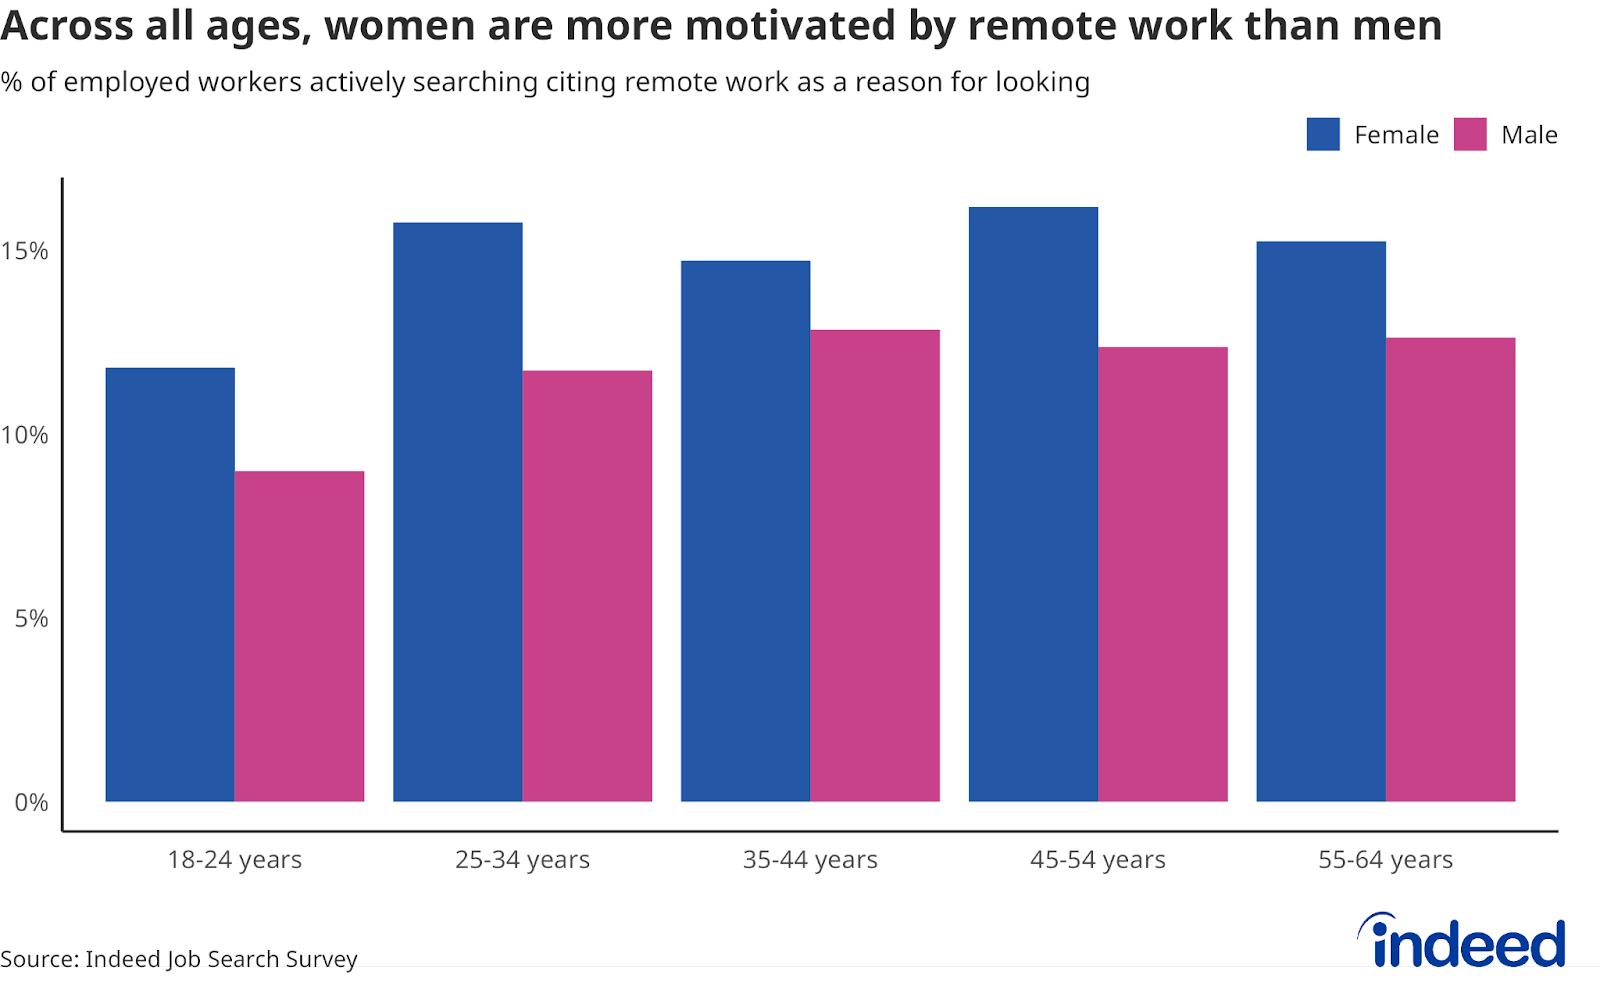 Bar chart titled “Across all ages, women are more motivated by remote work than men” shows that female employed job seekers were more likely to cite remote work as a reason for their job search than male job seekers in all age groups.